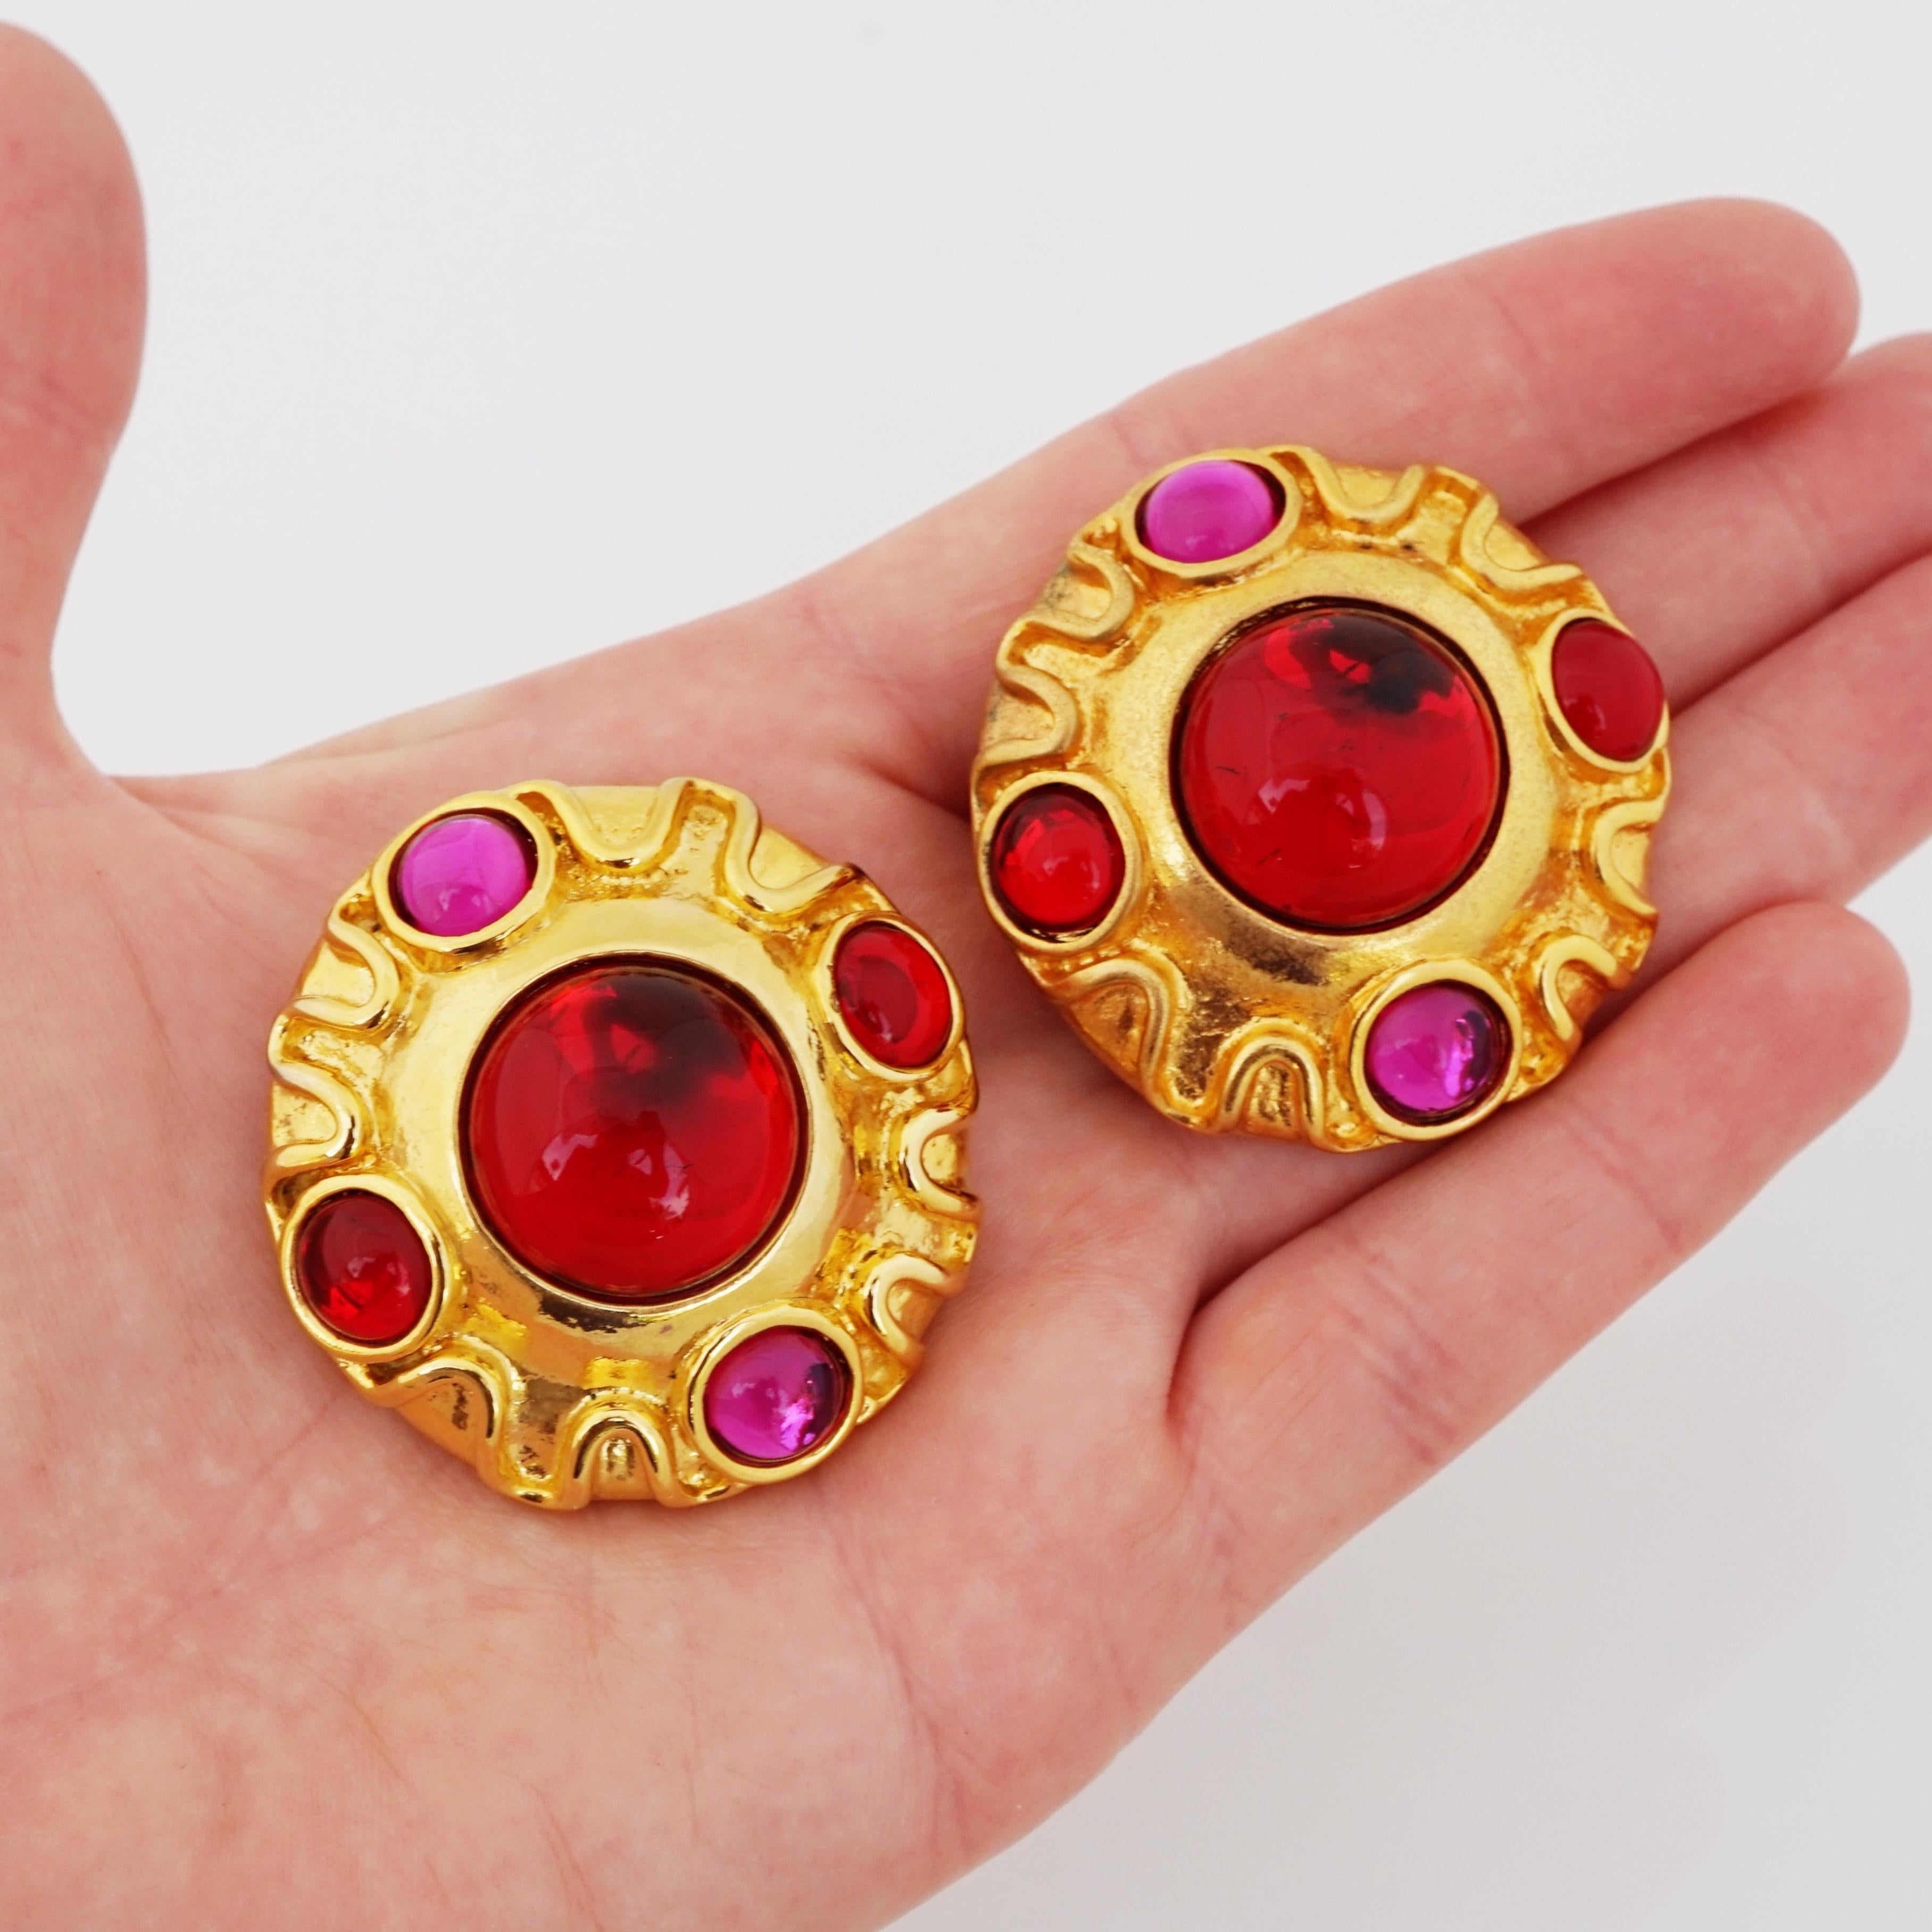 Women's Pink & Red Glass Cabochon Oversized Coin Statement Earrings By Escada, 1990s For Sale